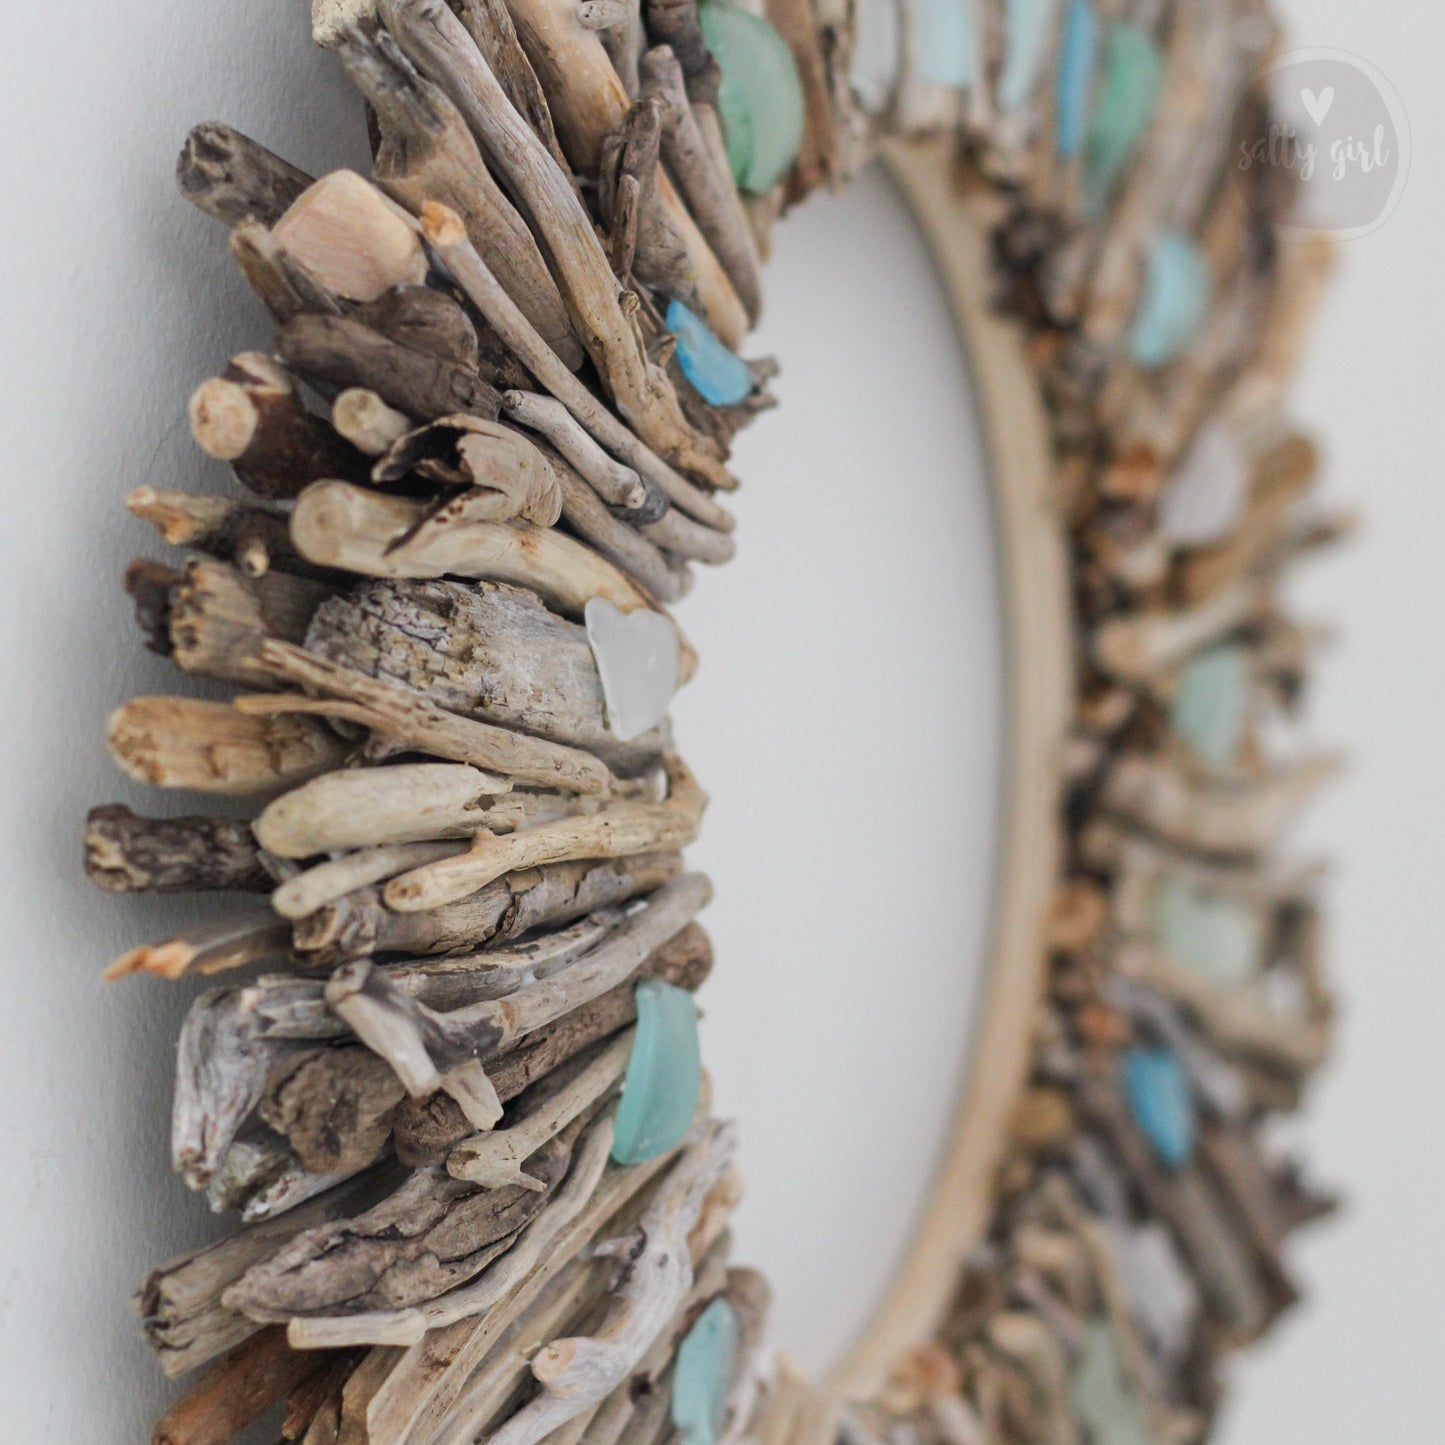 Driftwood Wreath with Shades of Aqua Sea Glass Accents - Sizes: 24" or 30"